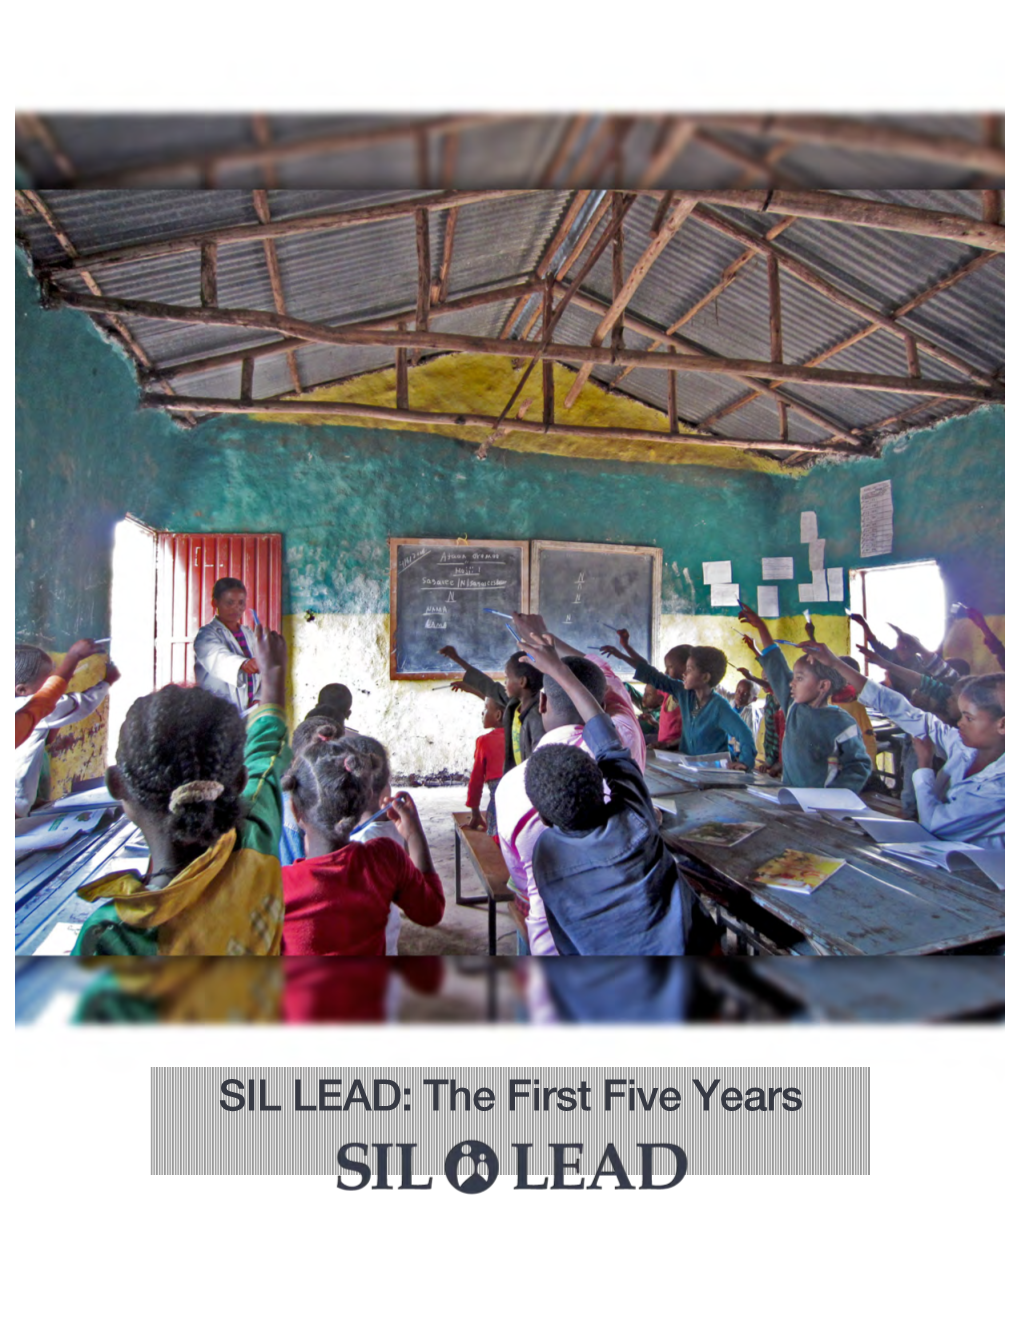 SIL LEAD: the First Five Years